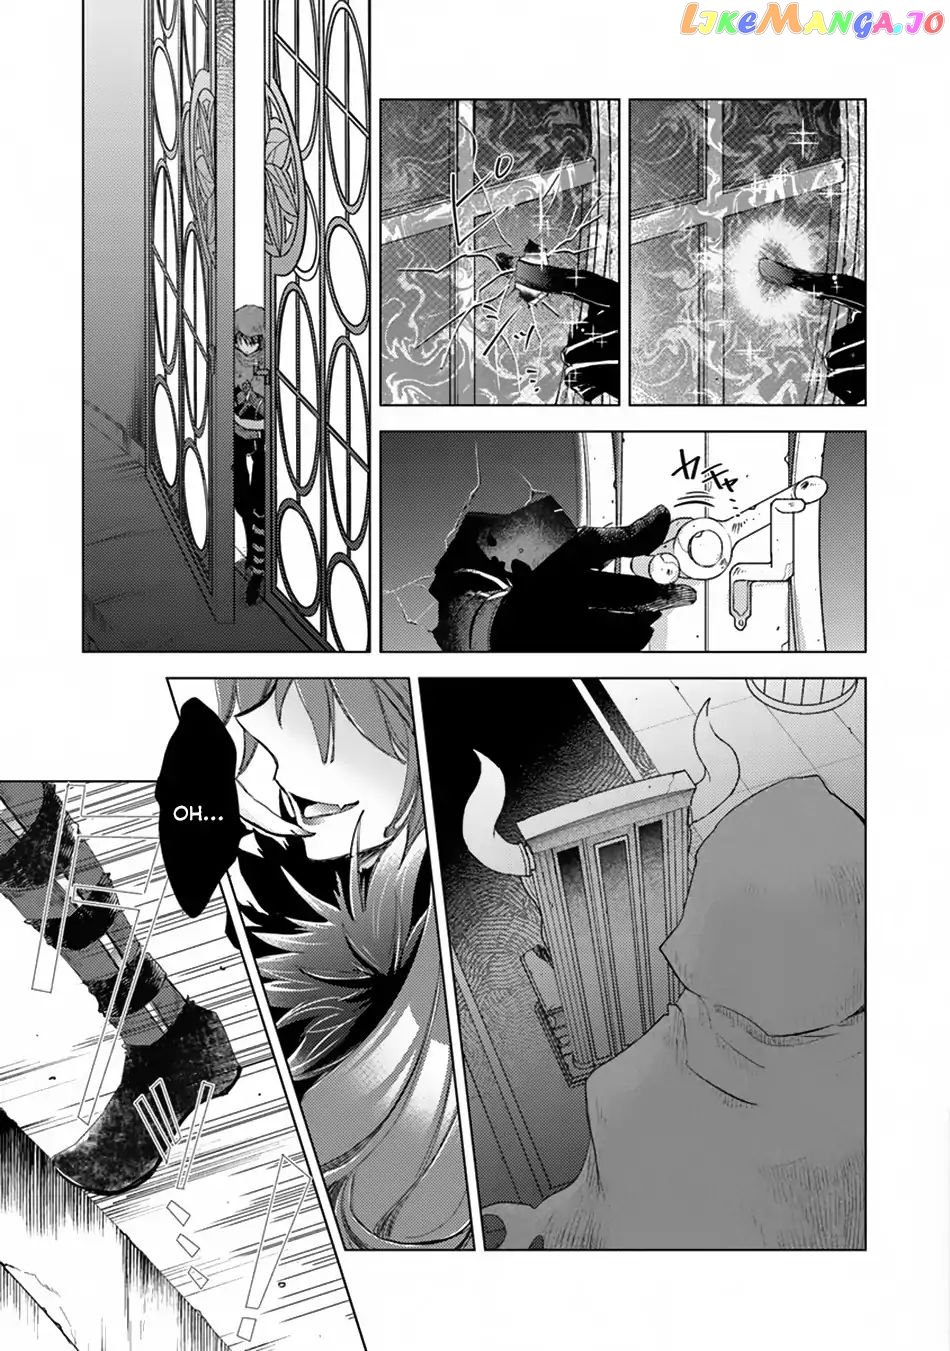 The Guild Official With The Out-of-the-Way Skill “Shadowy” Is, In Fact, The Legendary Assassin chapter 1 - page 7